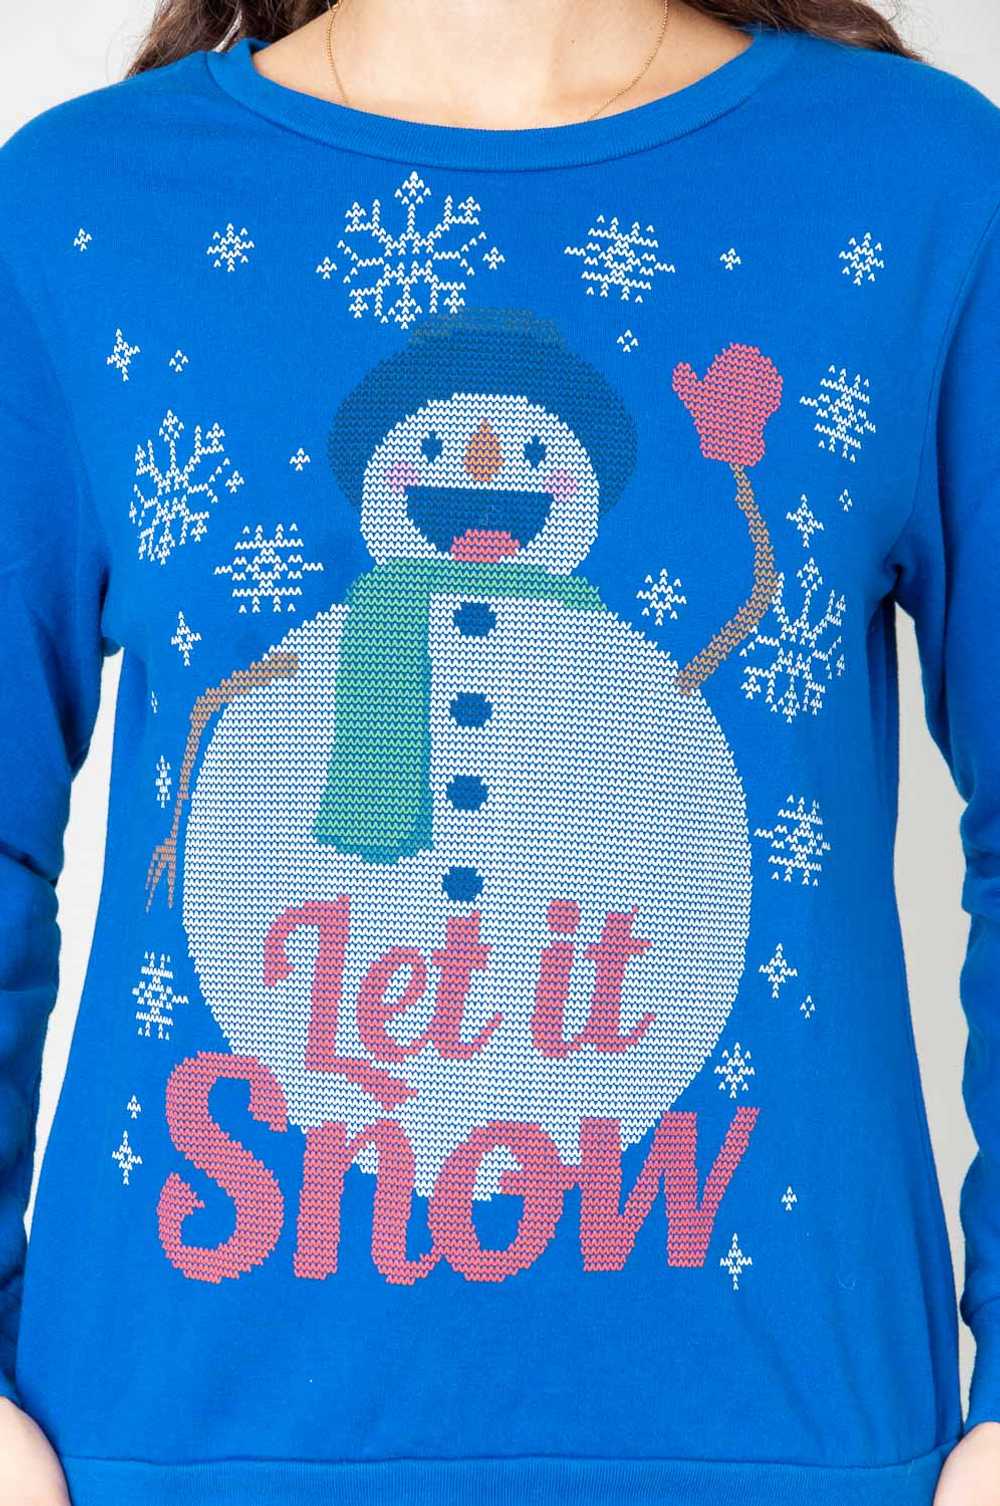 Let It Snow Christmas Sweater Blue With Snowman M… - image 4